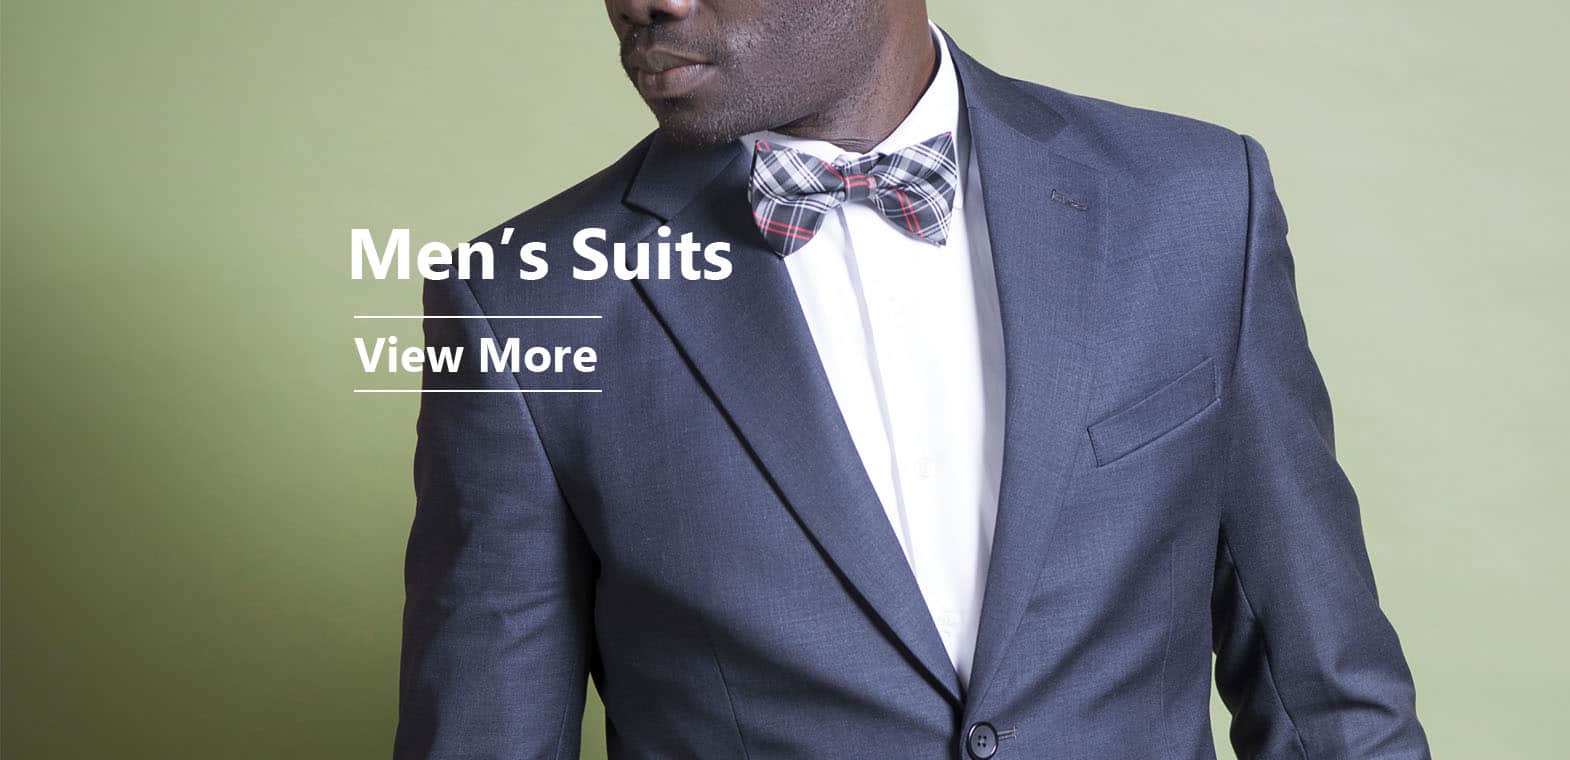 Bespoke Suits and Shirts by Ghanaian Tailor, Adjei Anang